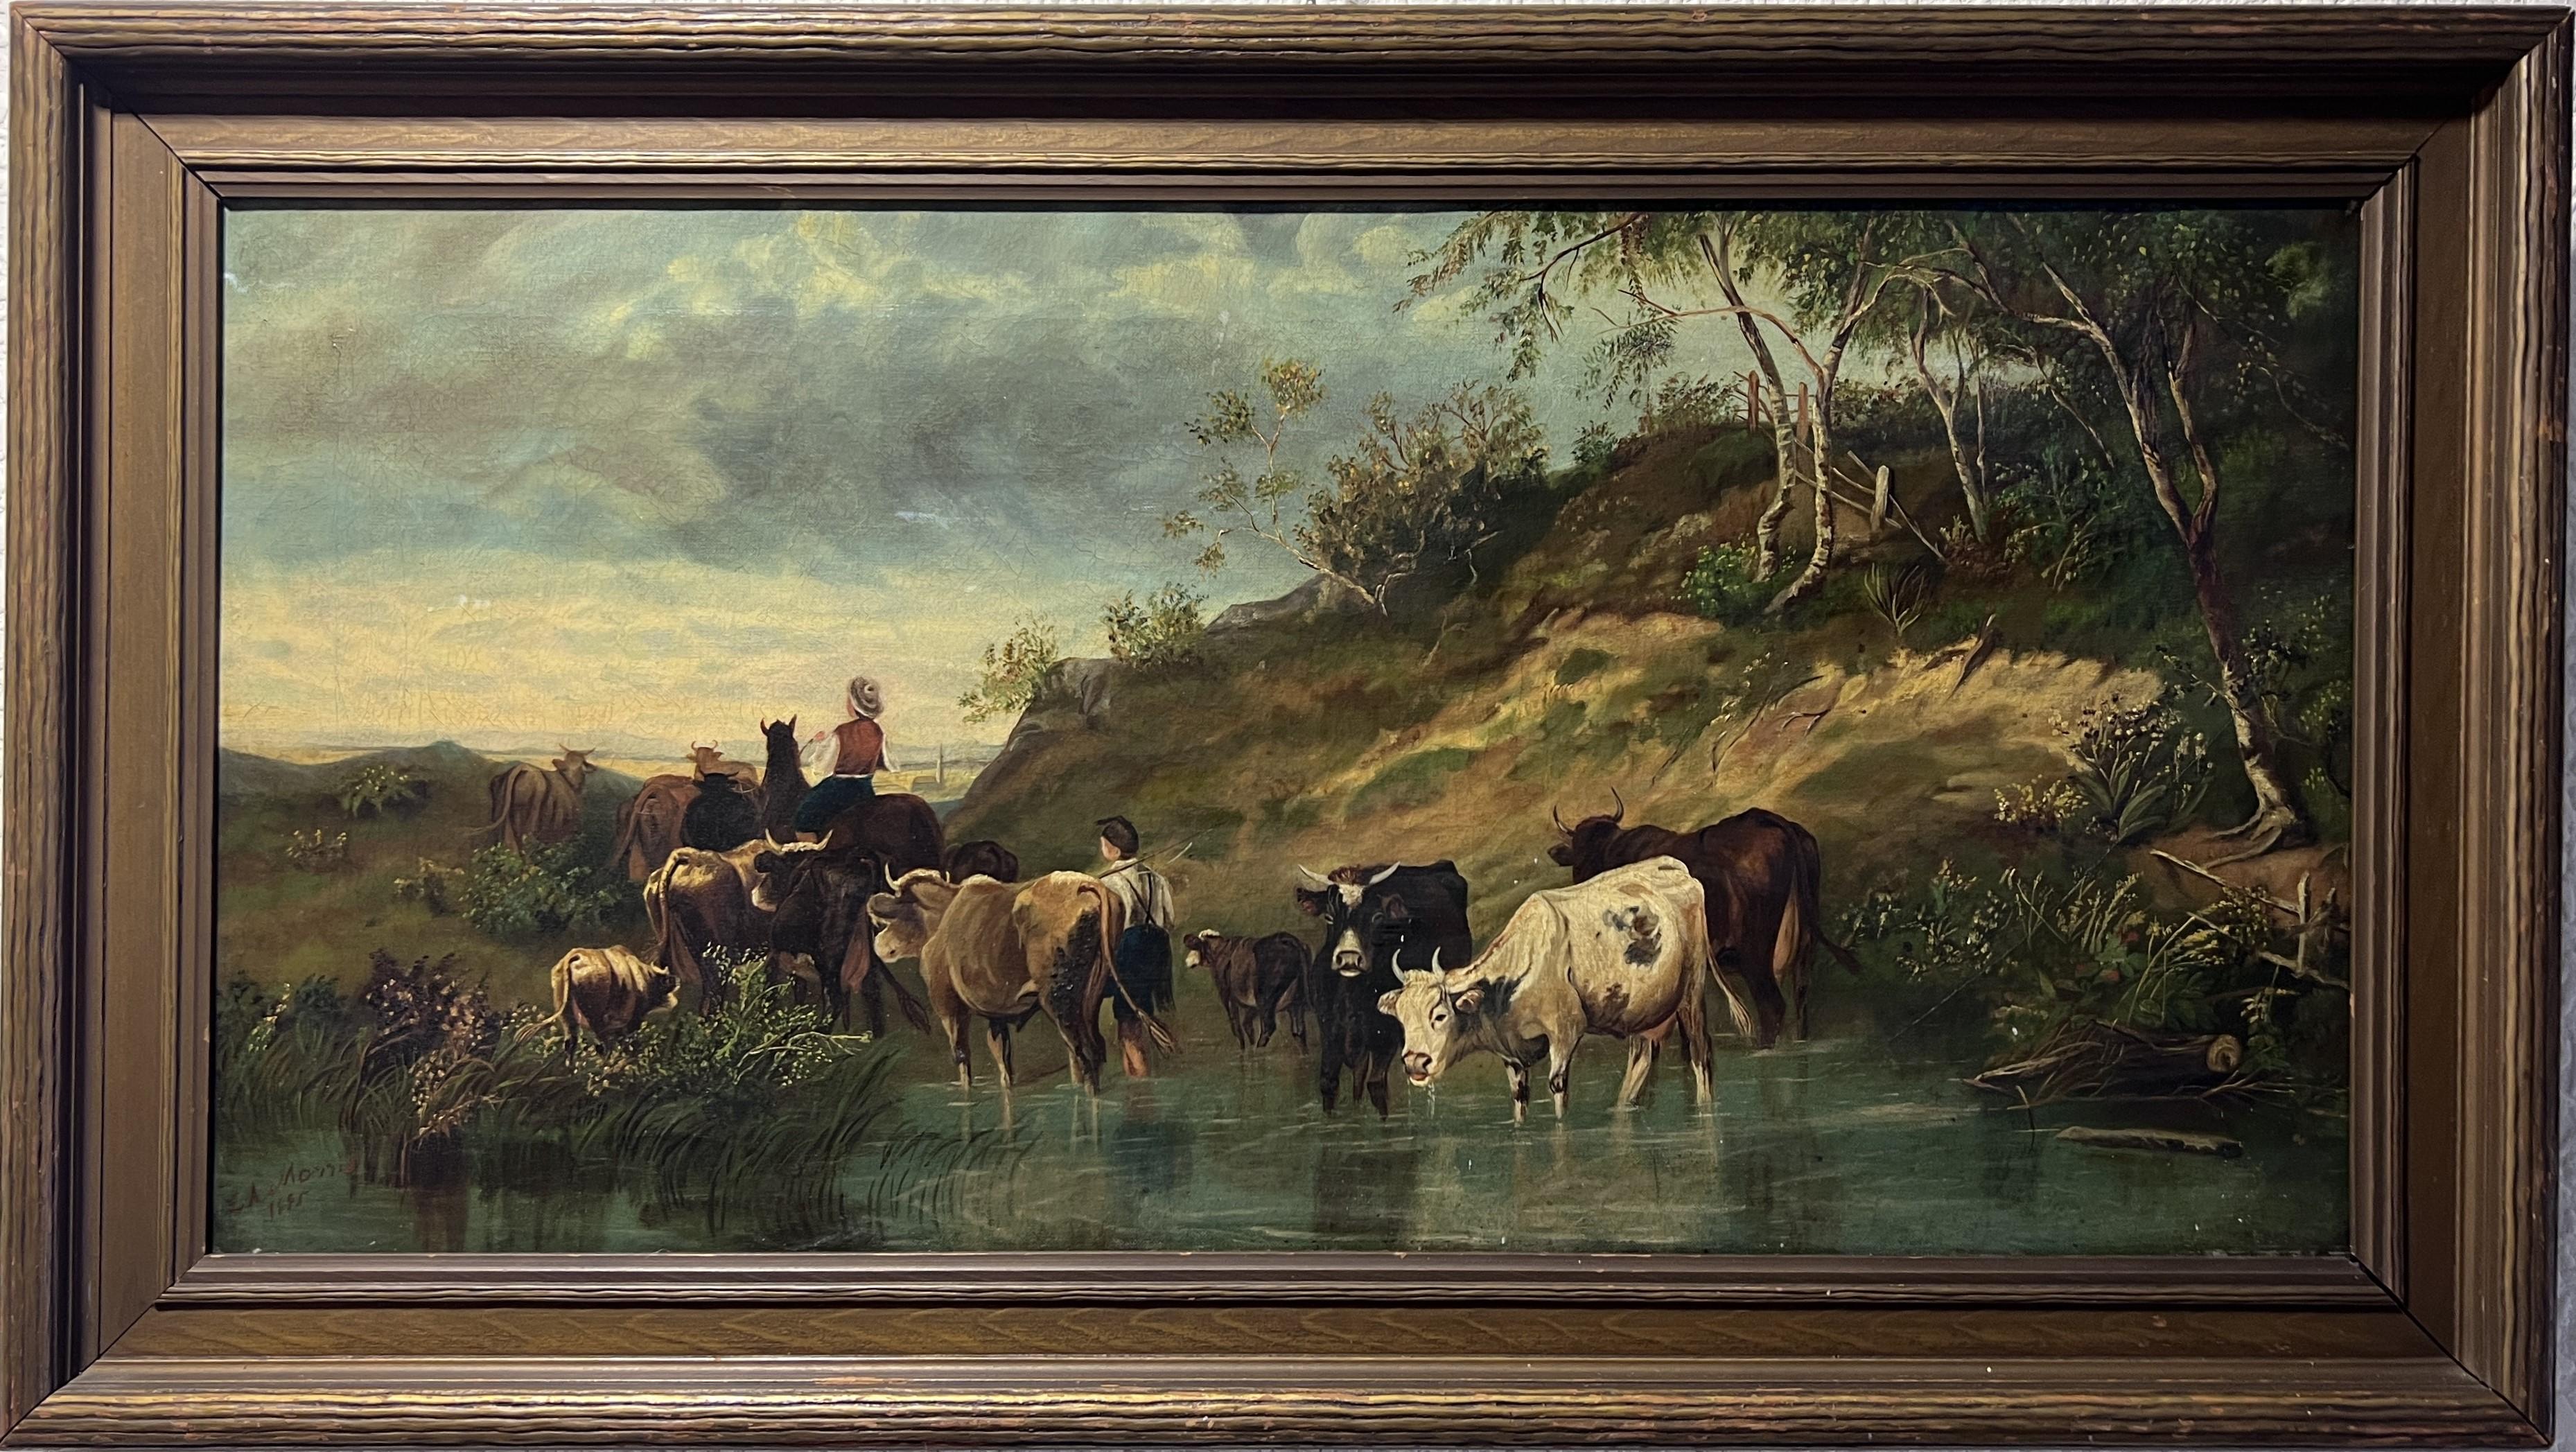 This is a large original antique 19-century oil painting on canvas depicting a rural farm landscape and genre scene - two shepherd boys drive a herd of cows to a watering-place.
Looks gorgeous in an ornate gold frame.

Presented in a period